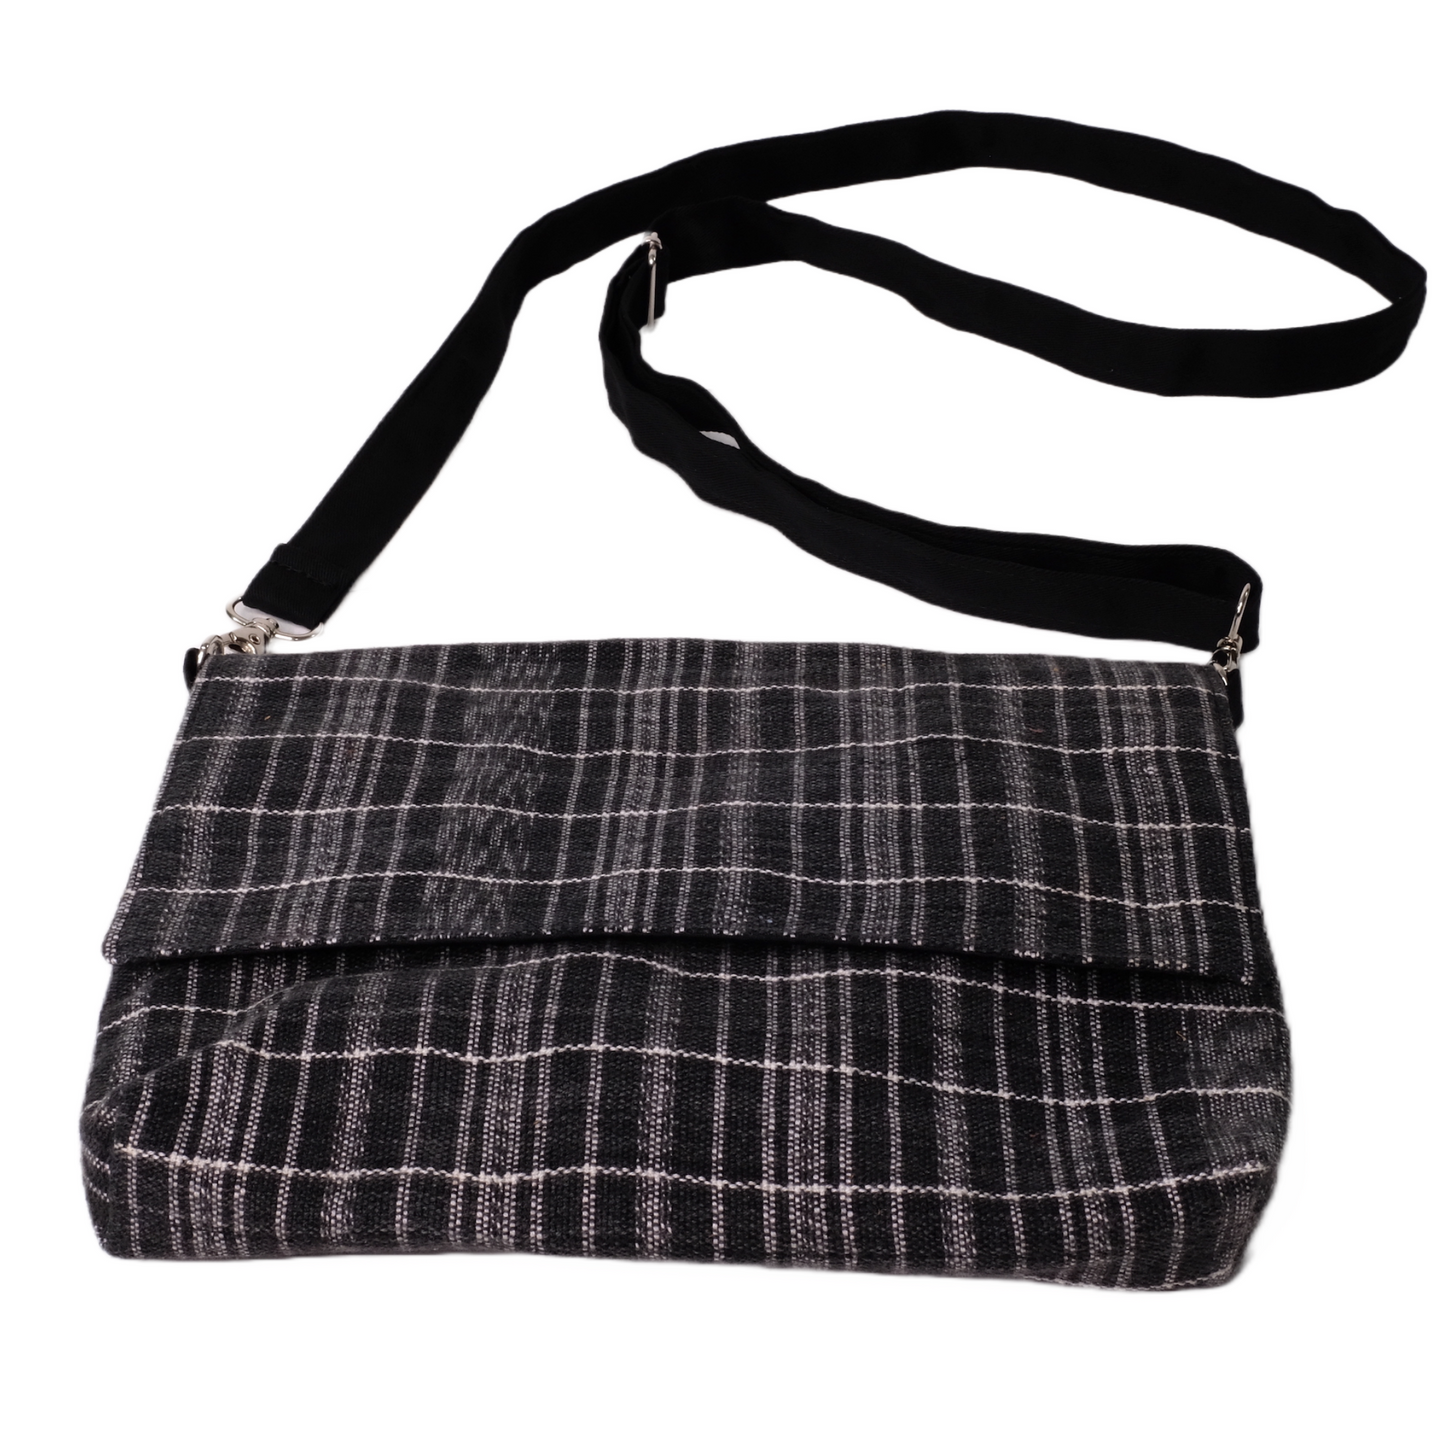 Crossbody bag is constructed with carefully handwoven black ikat cotton textiles.